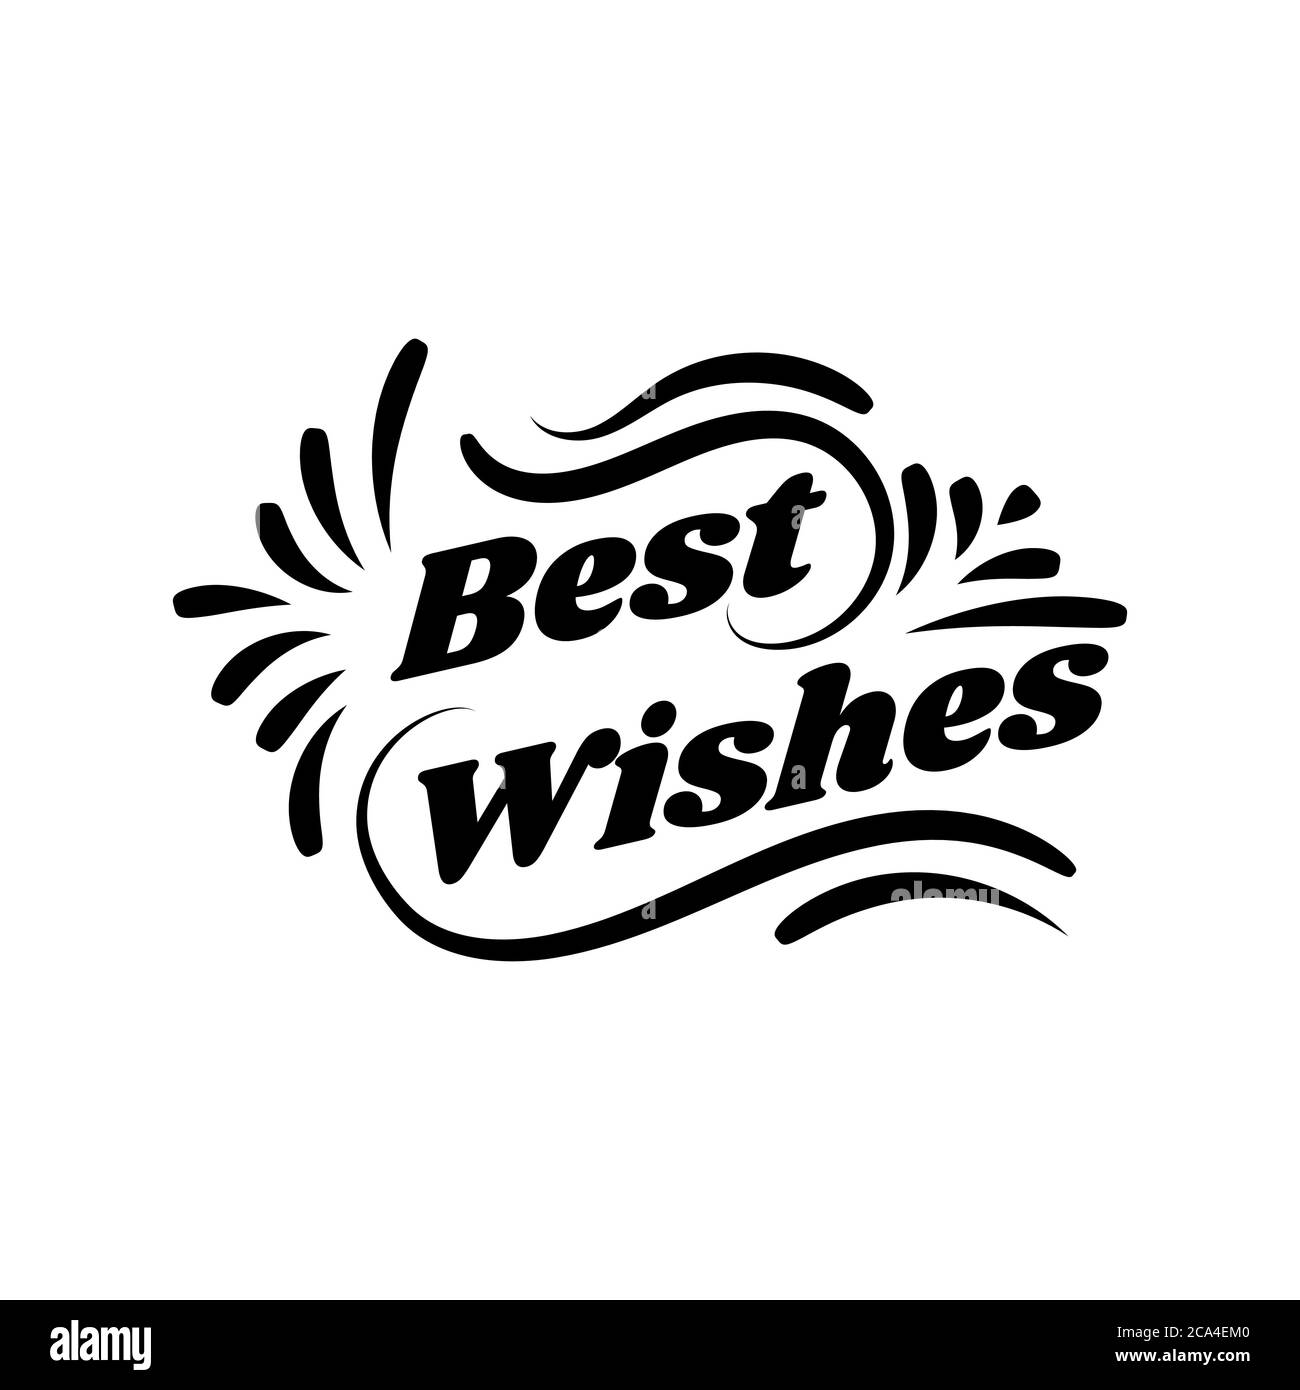 Best wishes Black and White Stock Photos & Images - Alamy